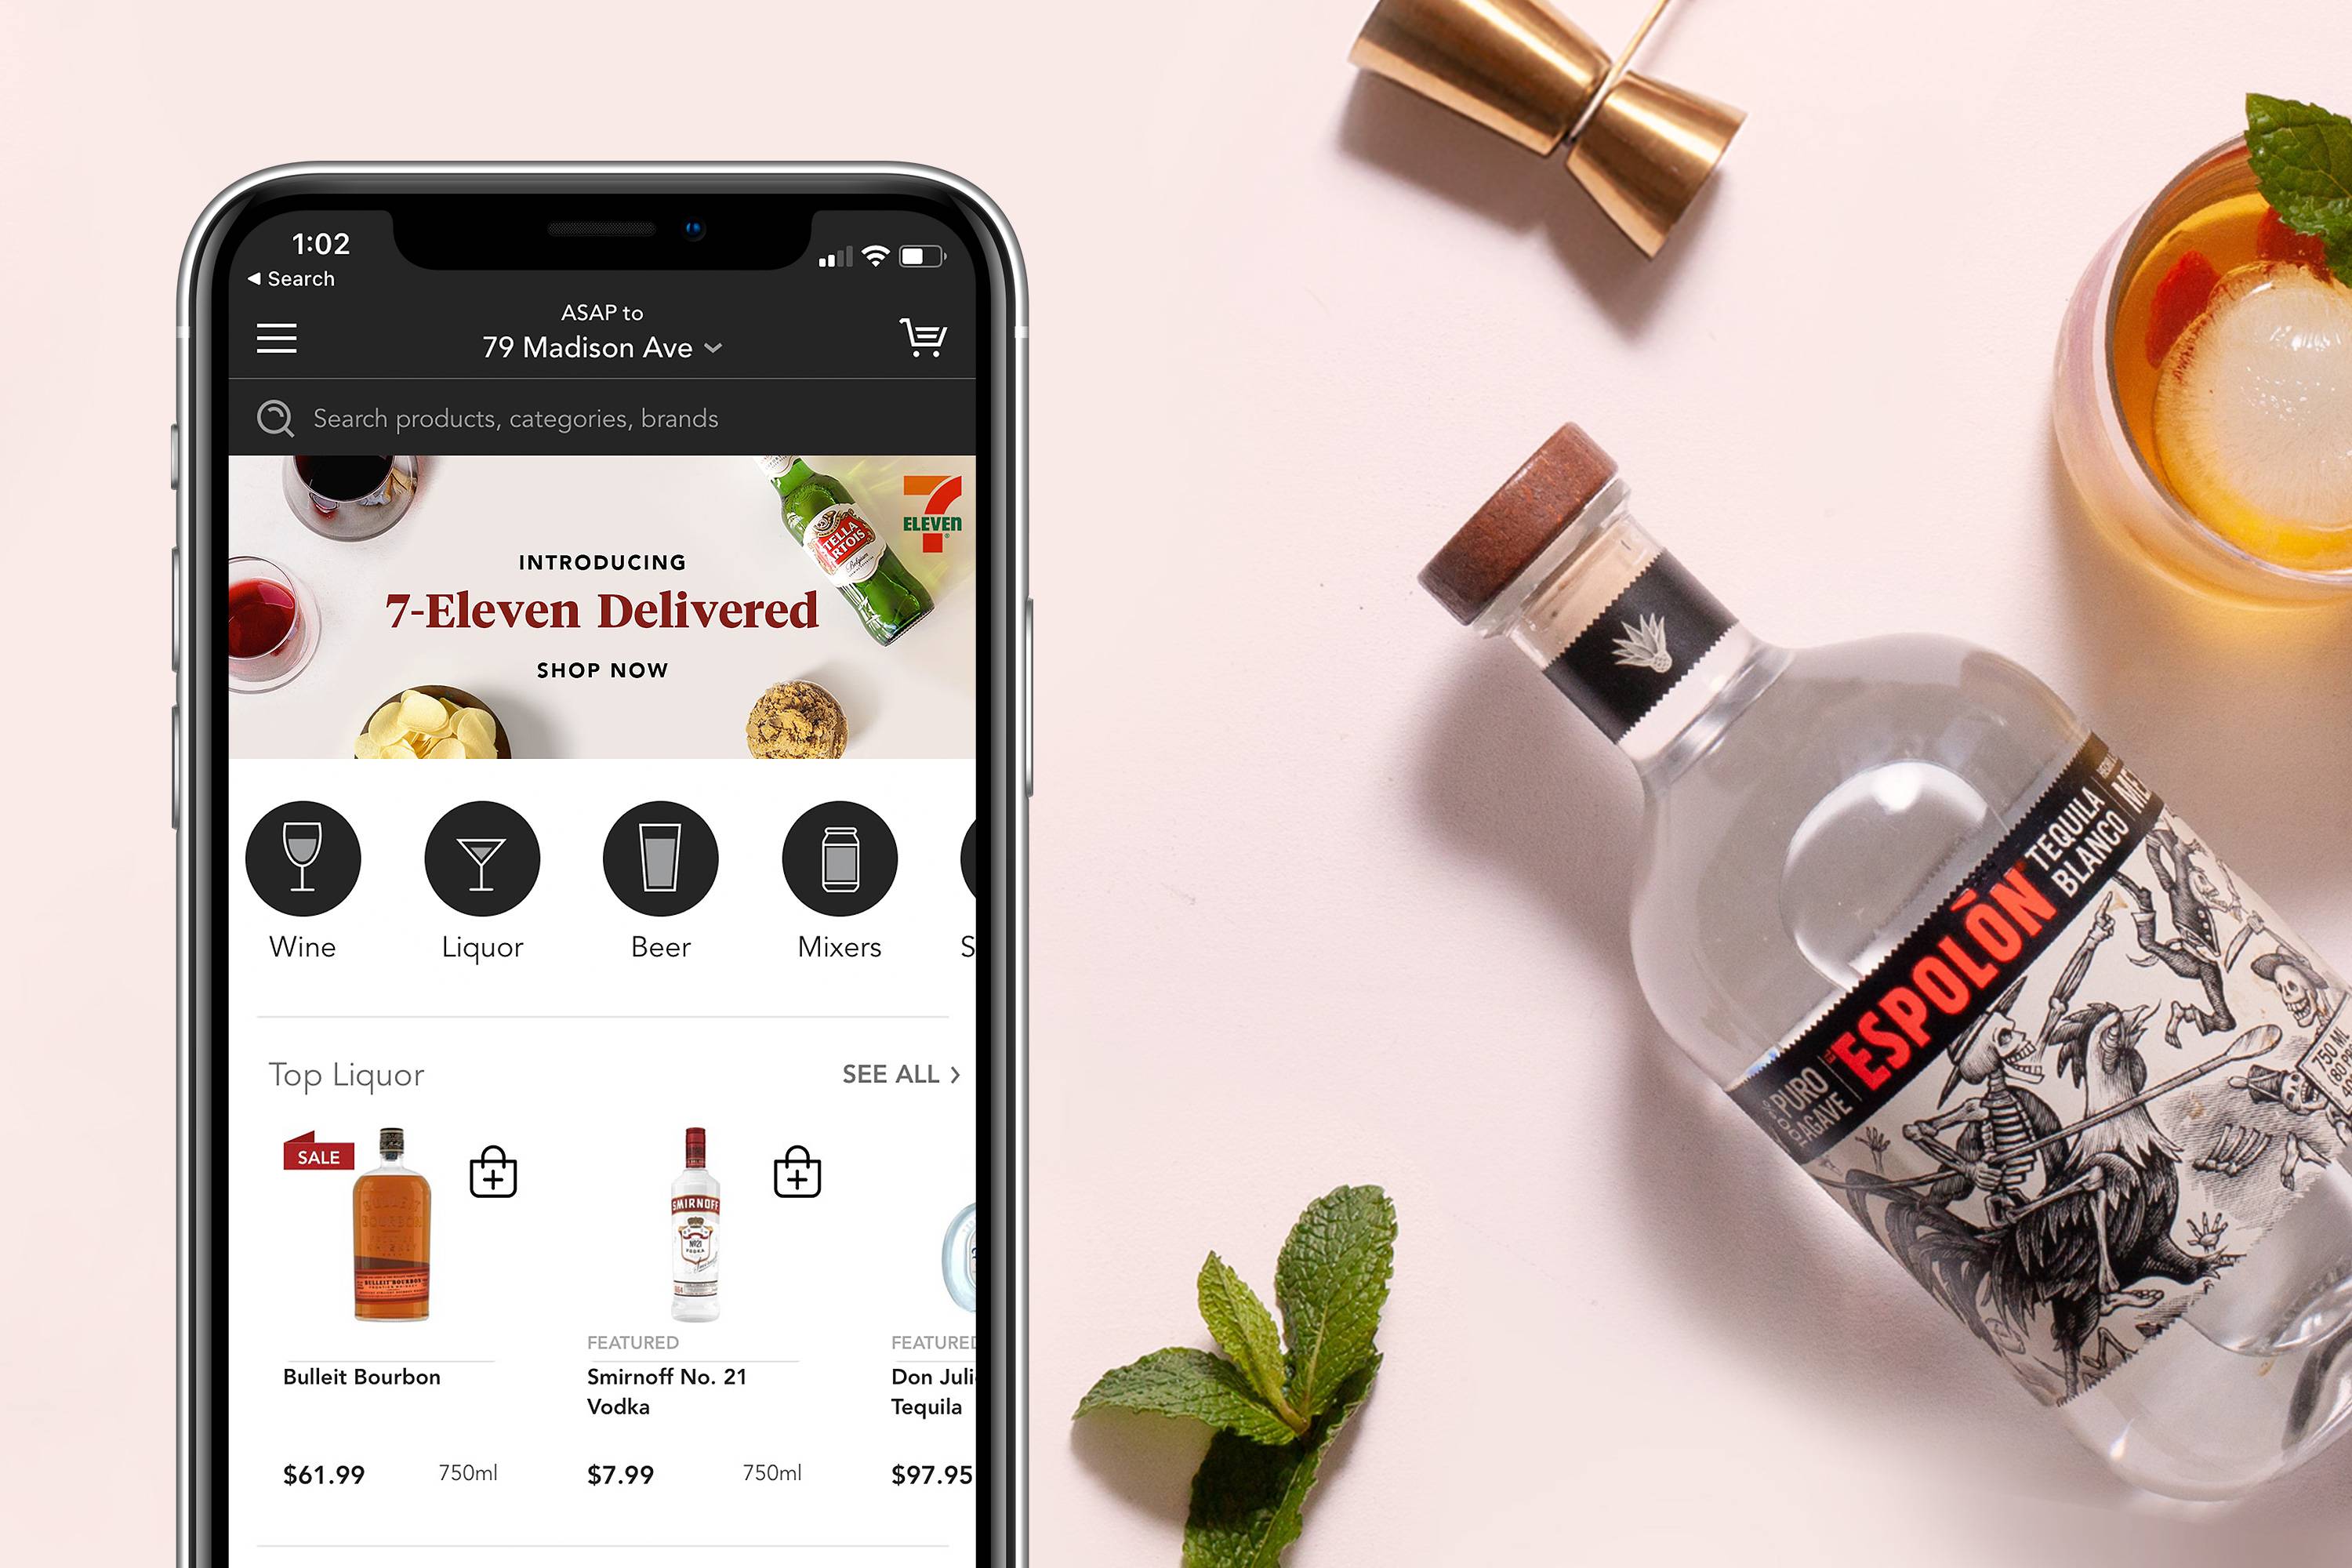 7-Eleven, minibar partner on app with tequila bottle